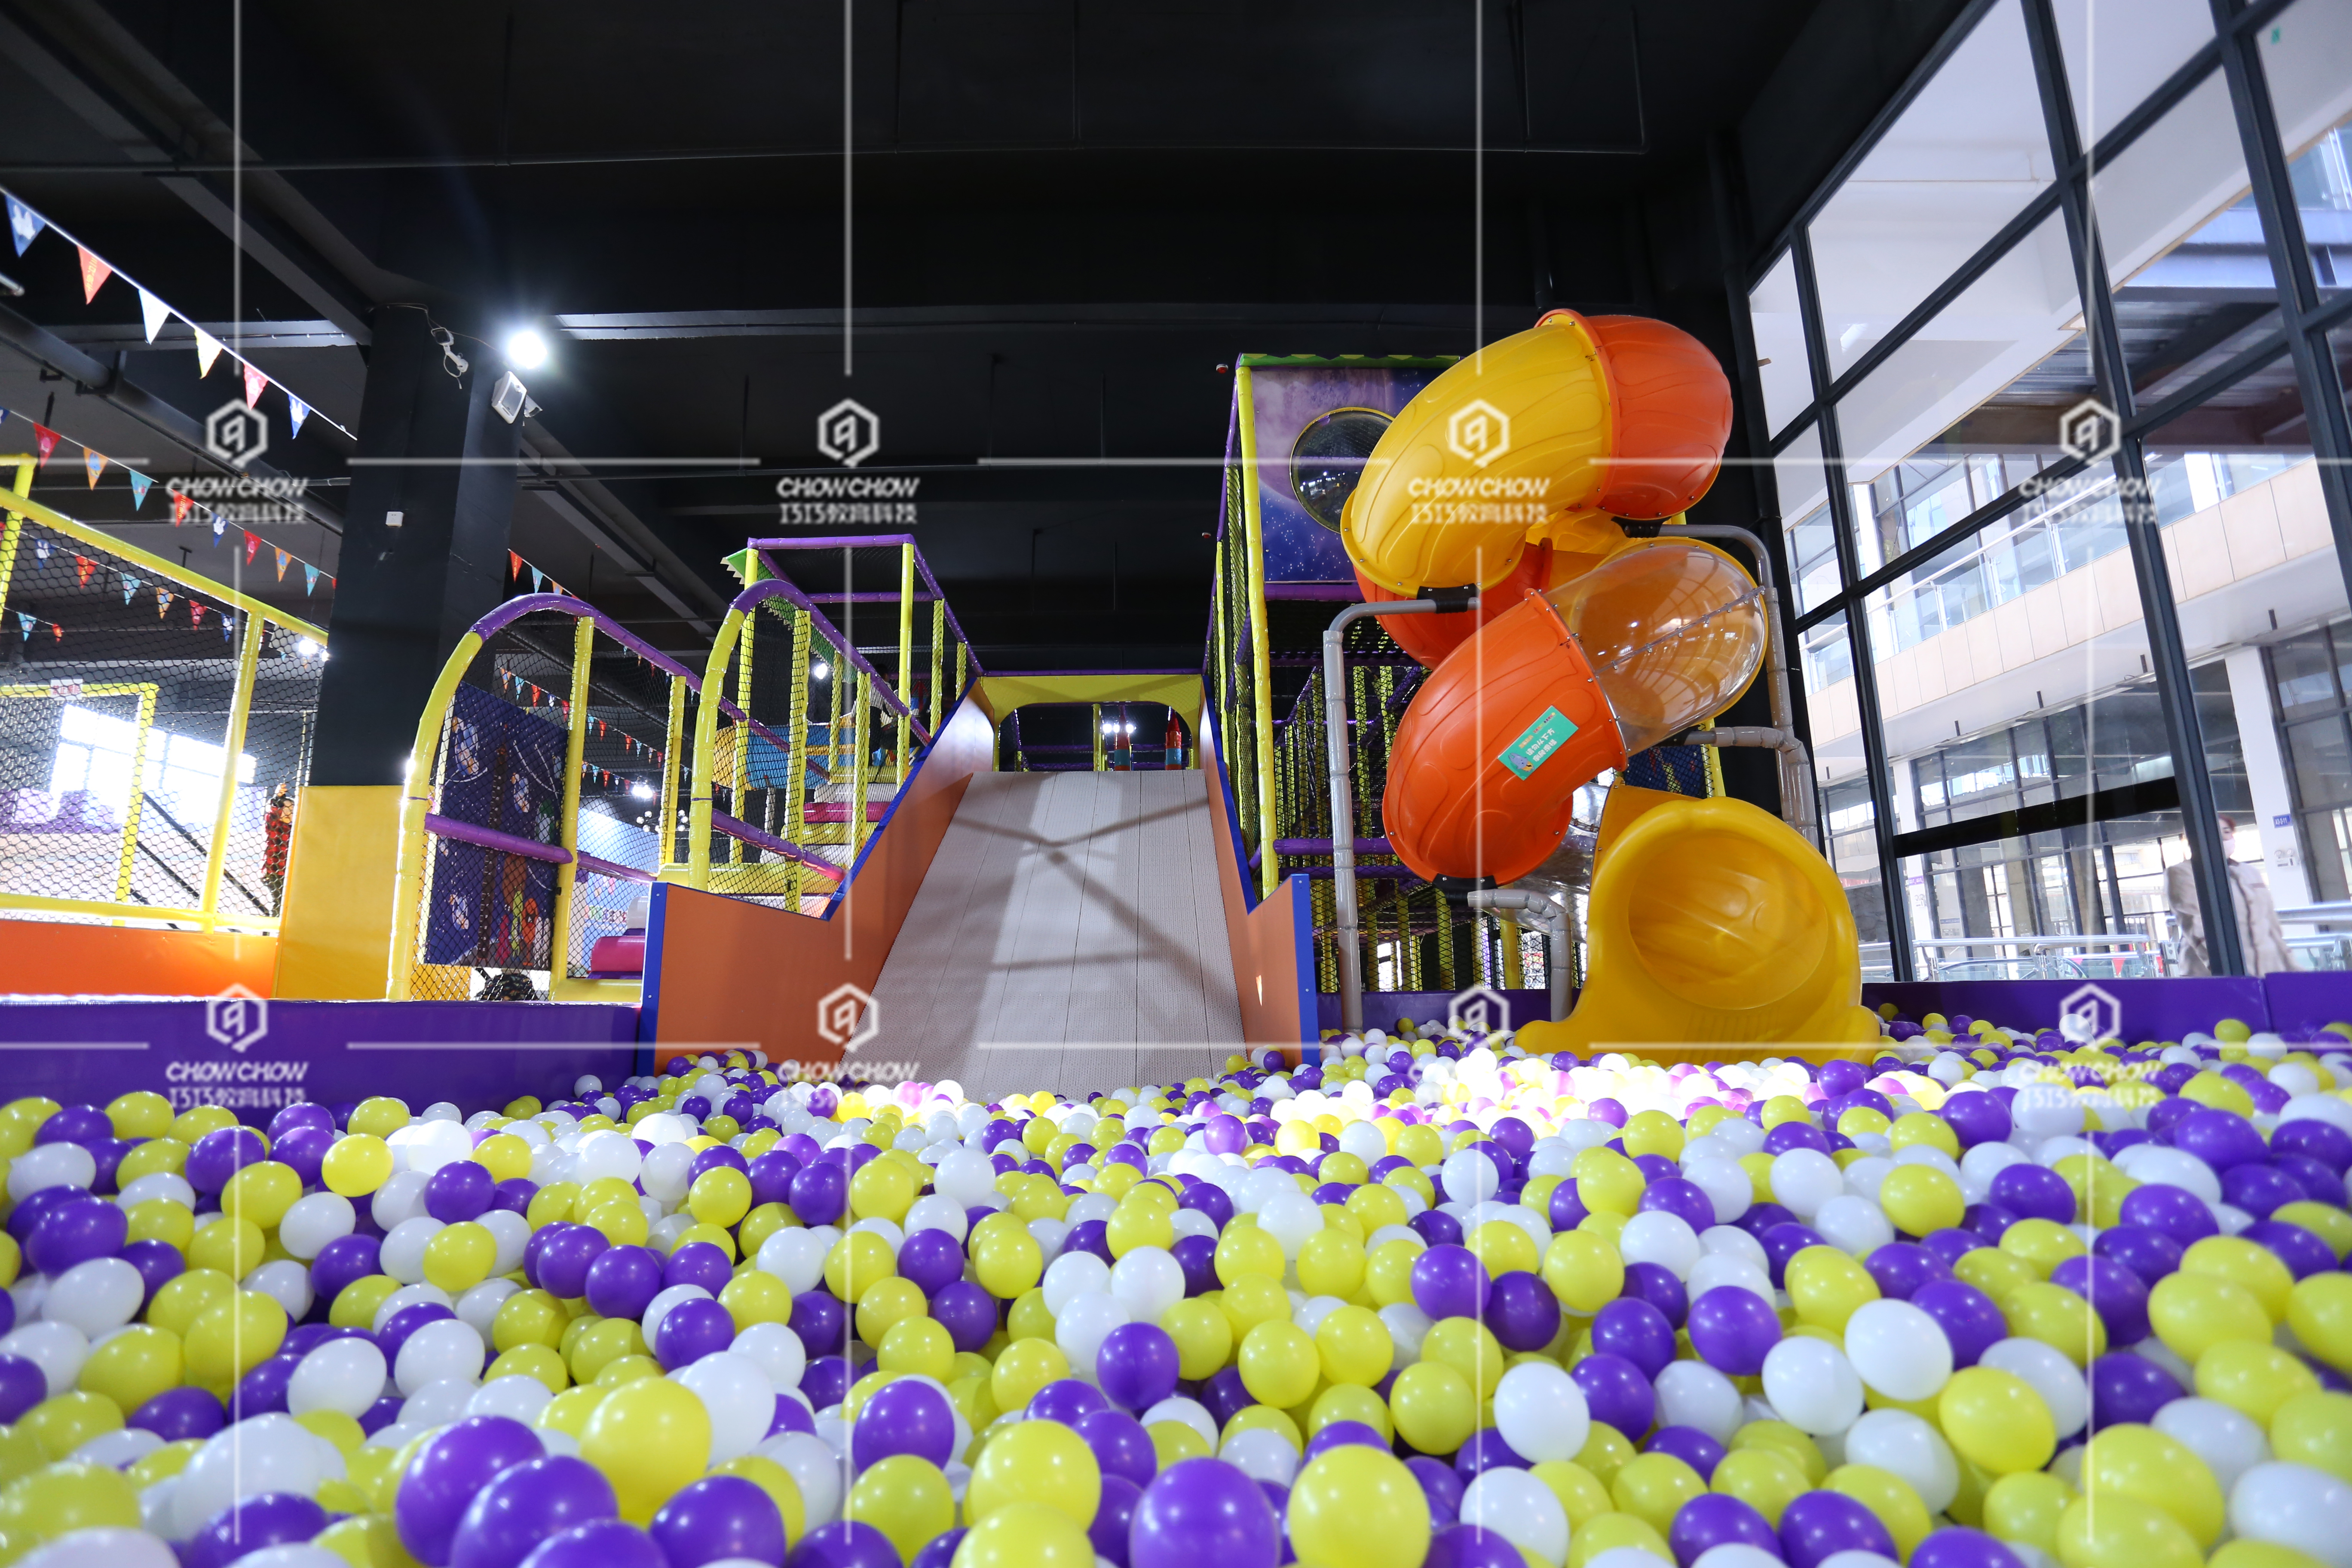 5 points to notice before opening an indoor playground(3）